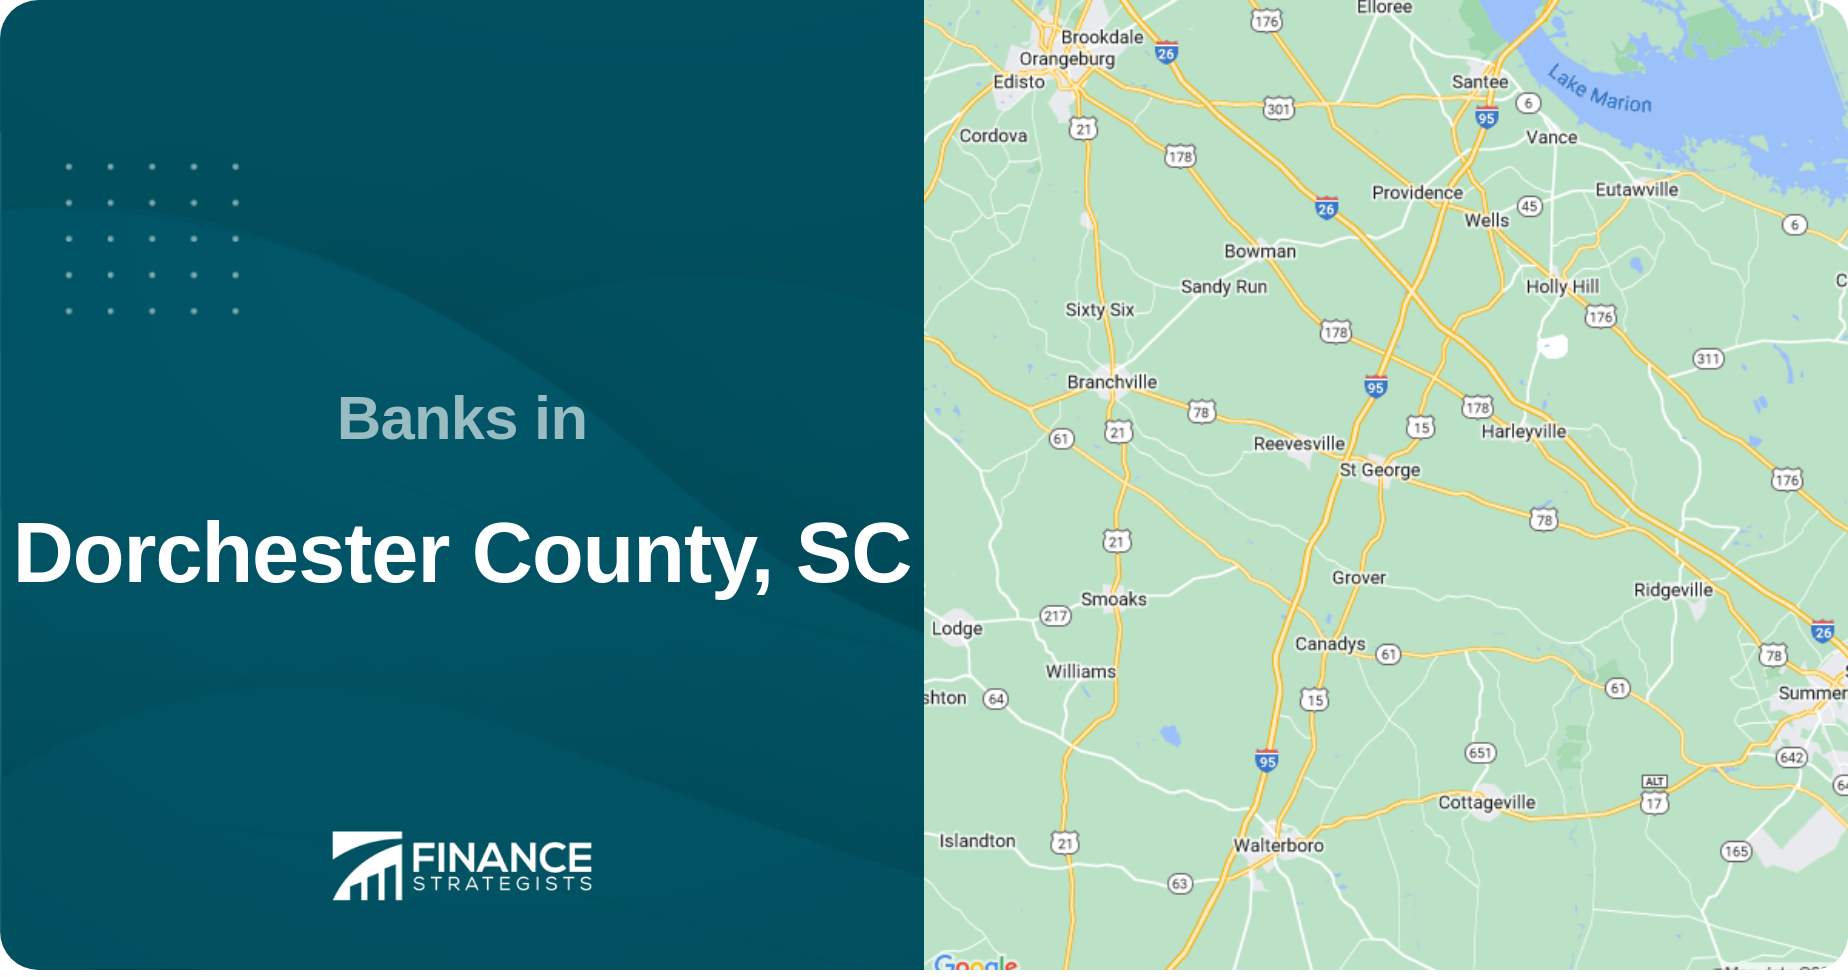 Banks in Dorchester County, SC